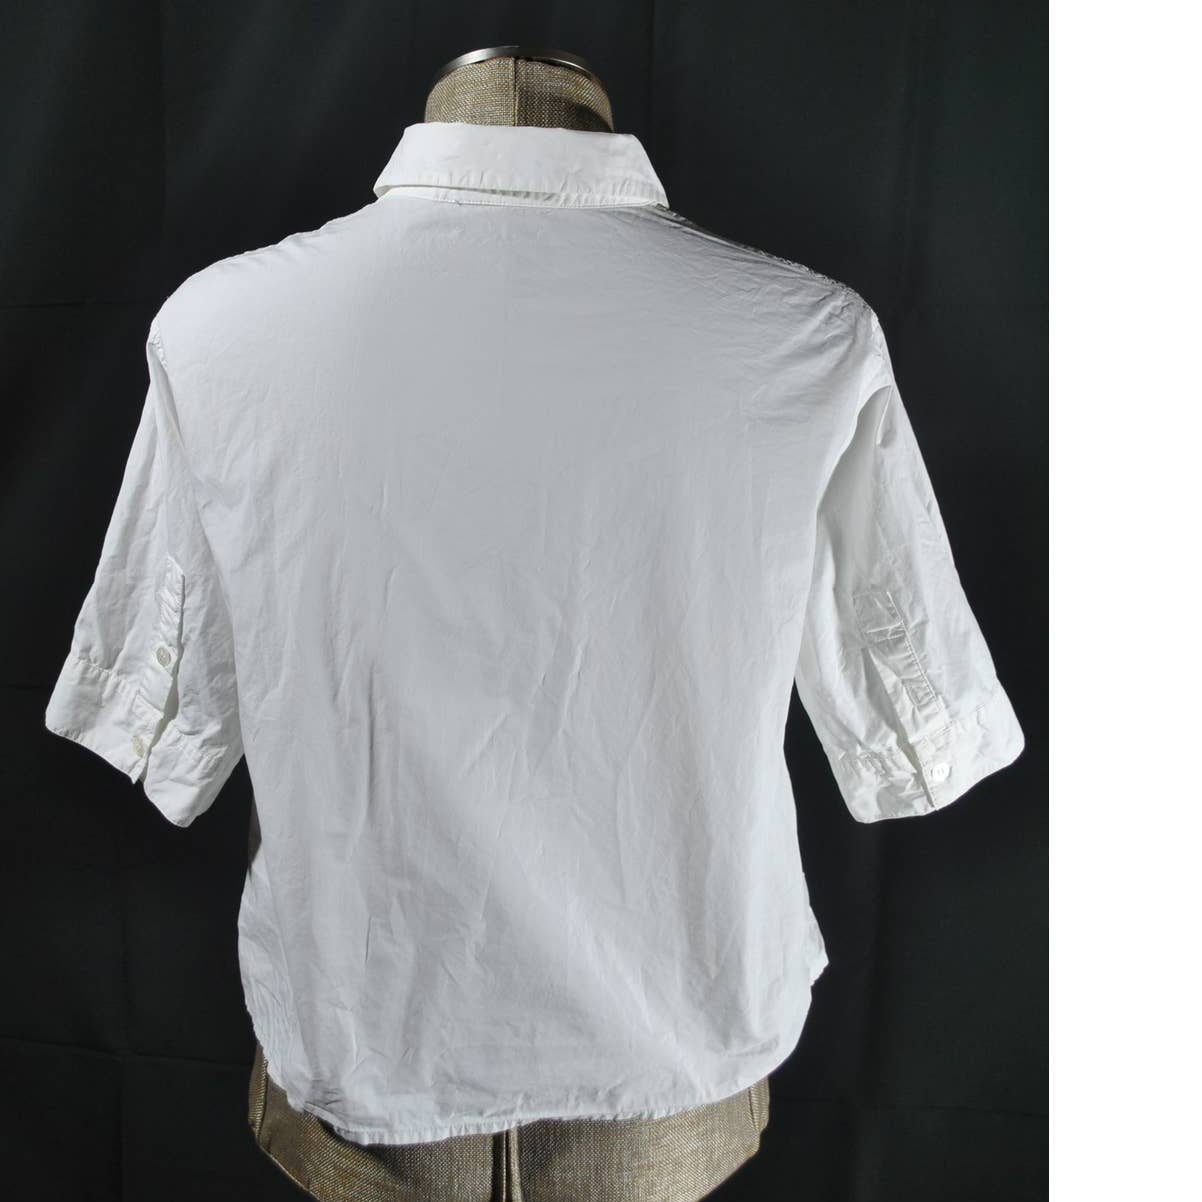 Equipment Femme White Button Up Top - S